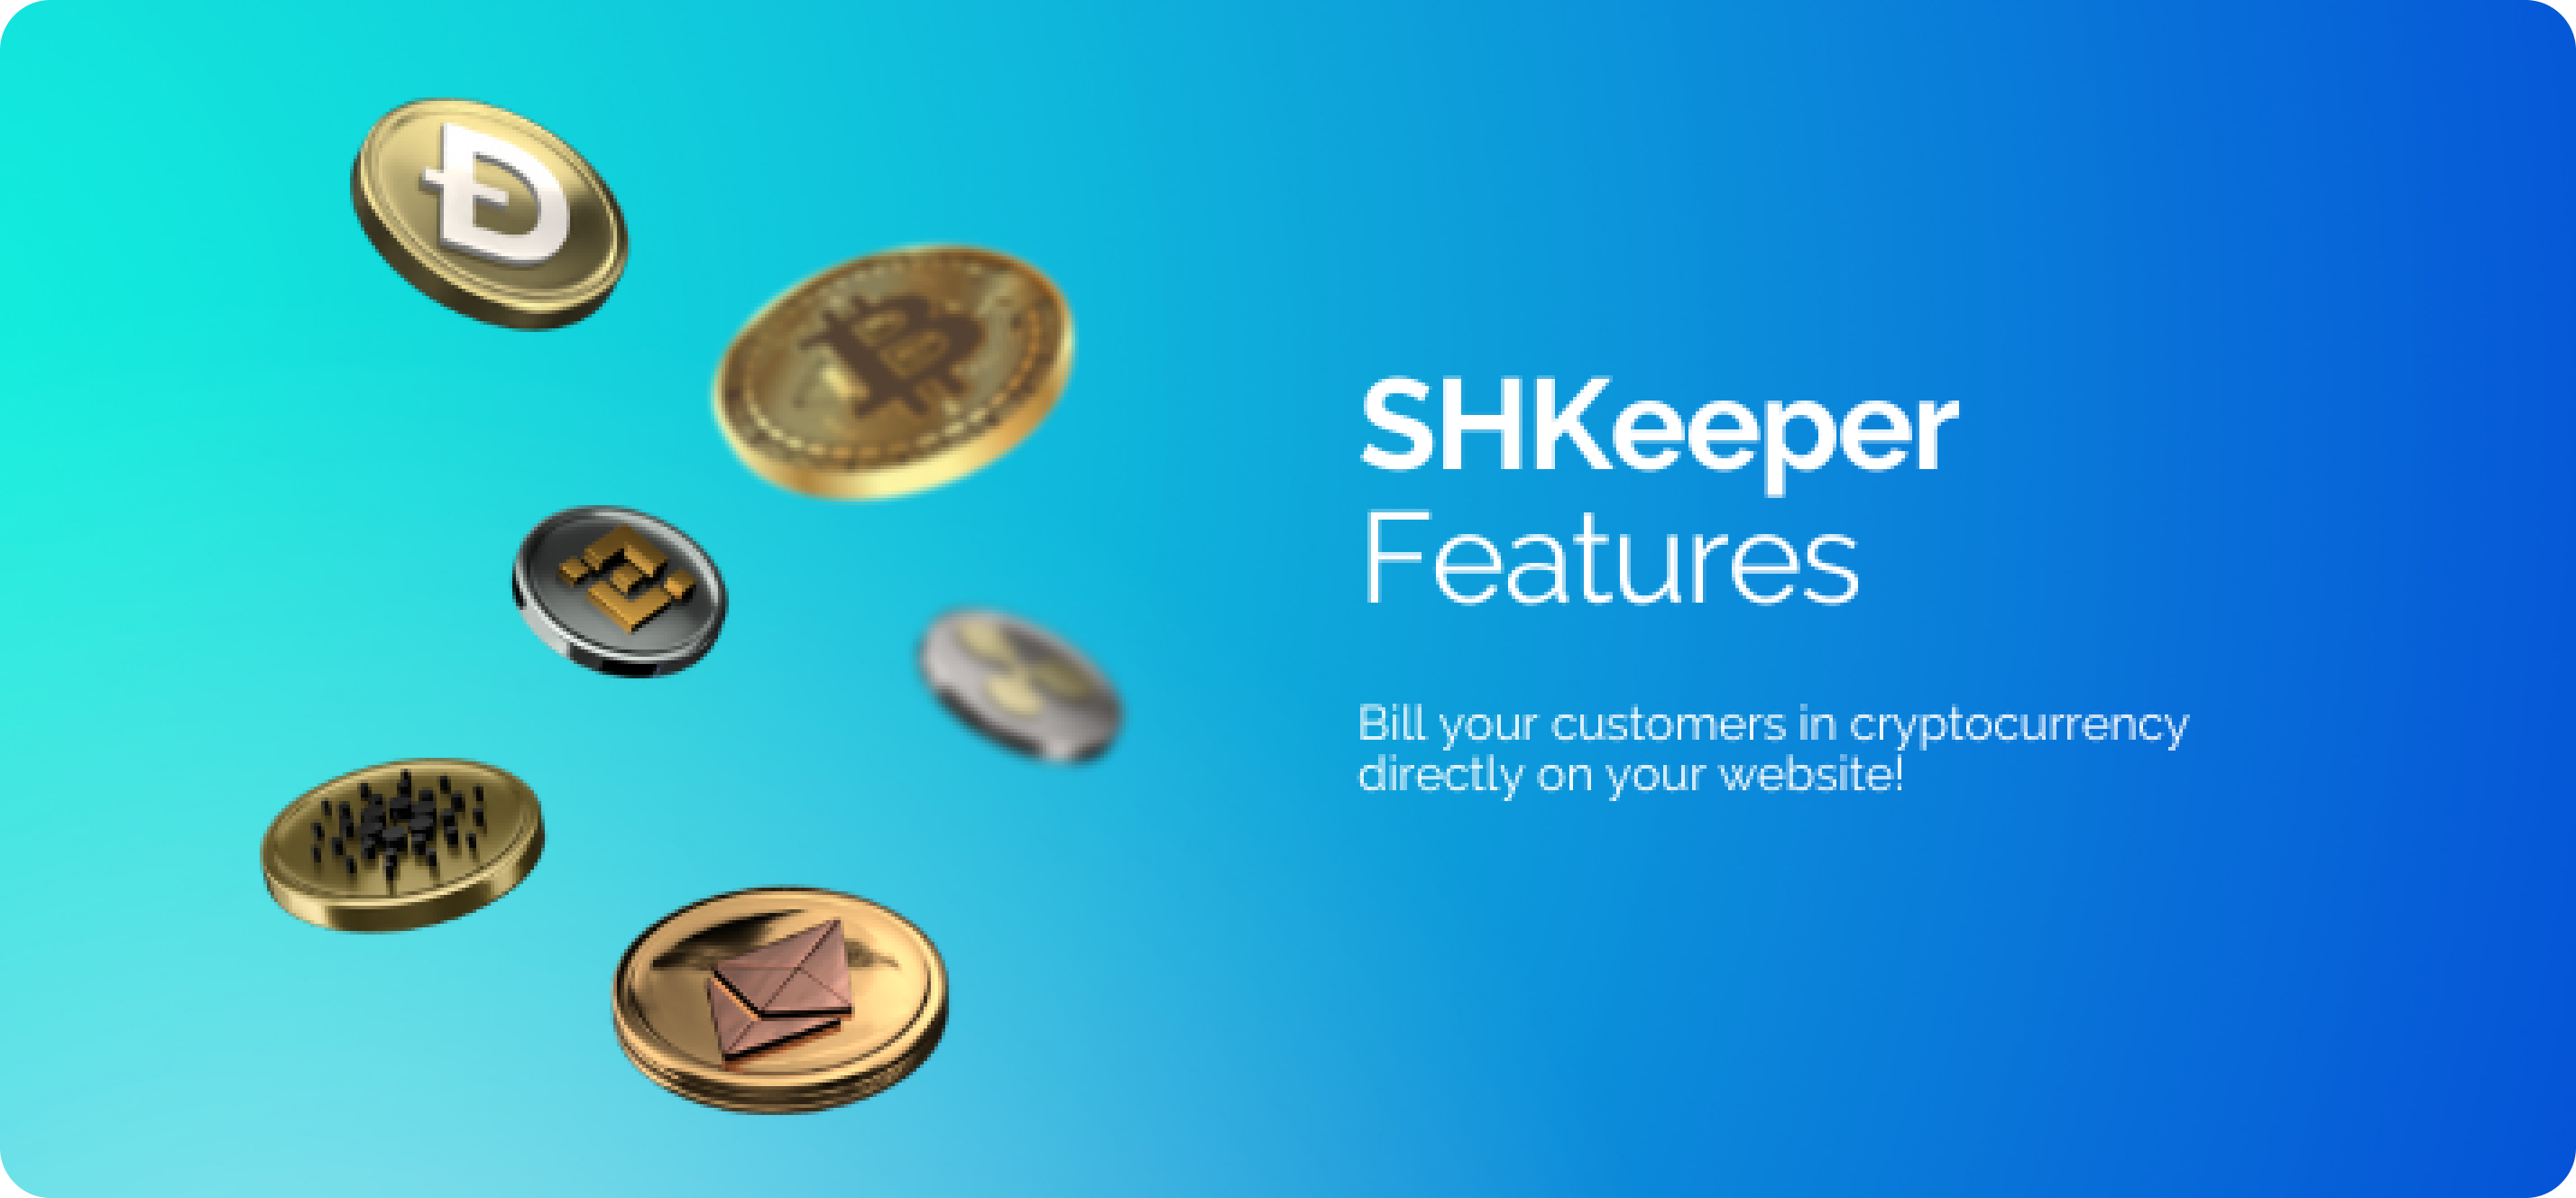 SHKeeper Features